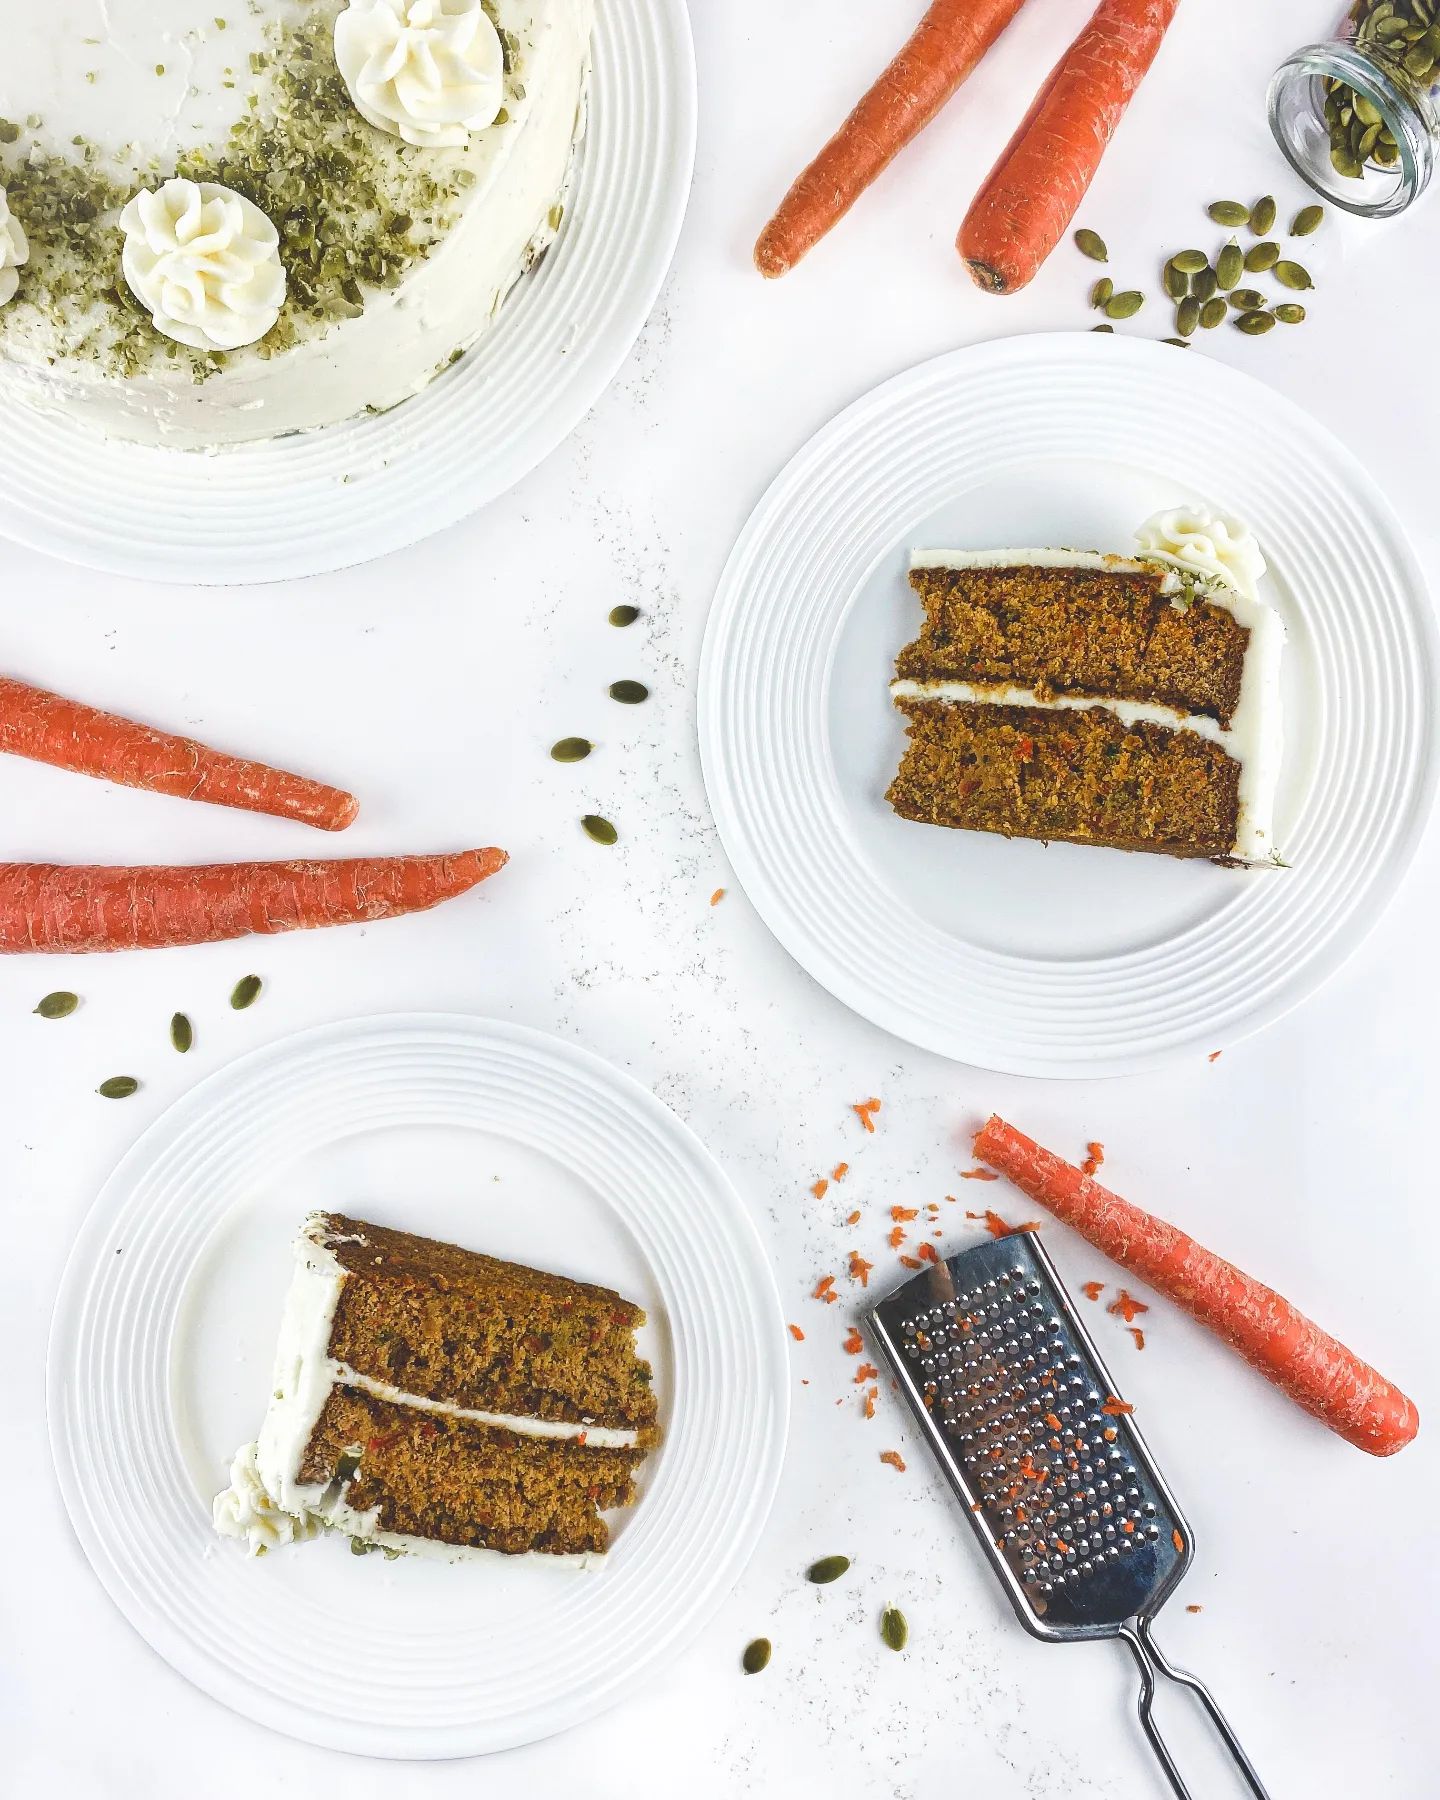 Two slices of carrot cake are displayed on a table alongside shaved carrots and a grater.